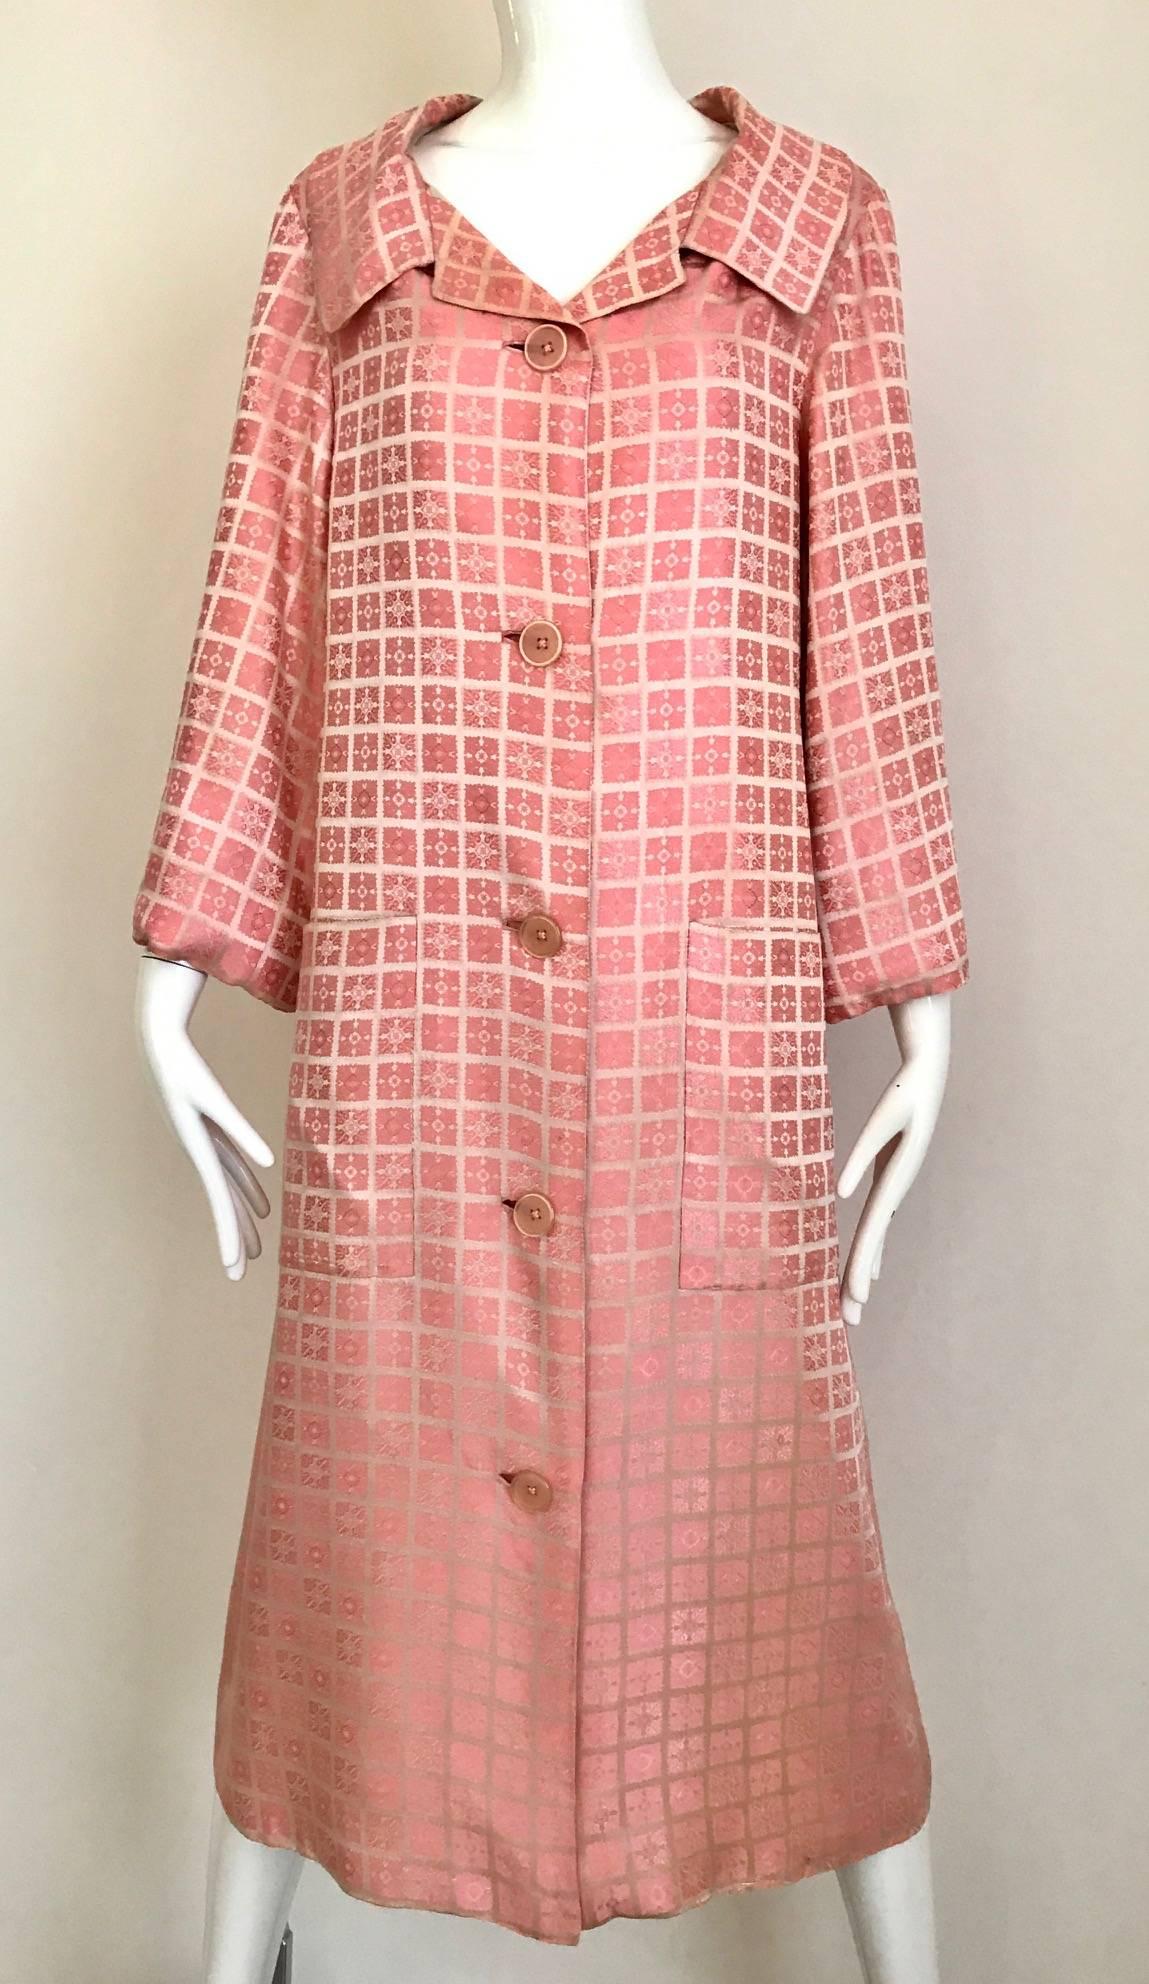 Vintage 1970s  Christian Dior Light Pink mosaic checkered print silk jacquard coat. 2 oversized pockets and silk belt. Coat lined in silk.
Size: Medium - Large
Bust: 40